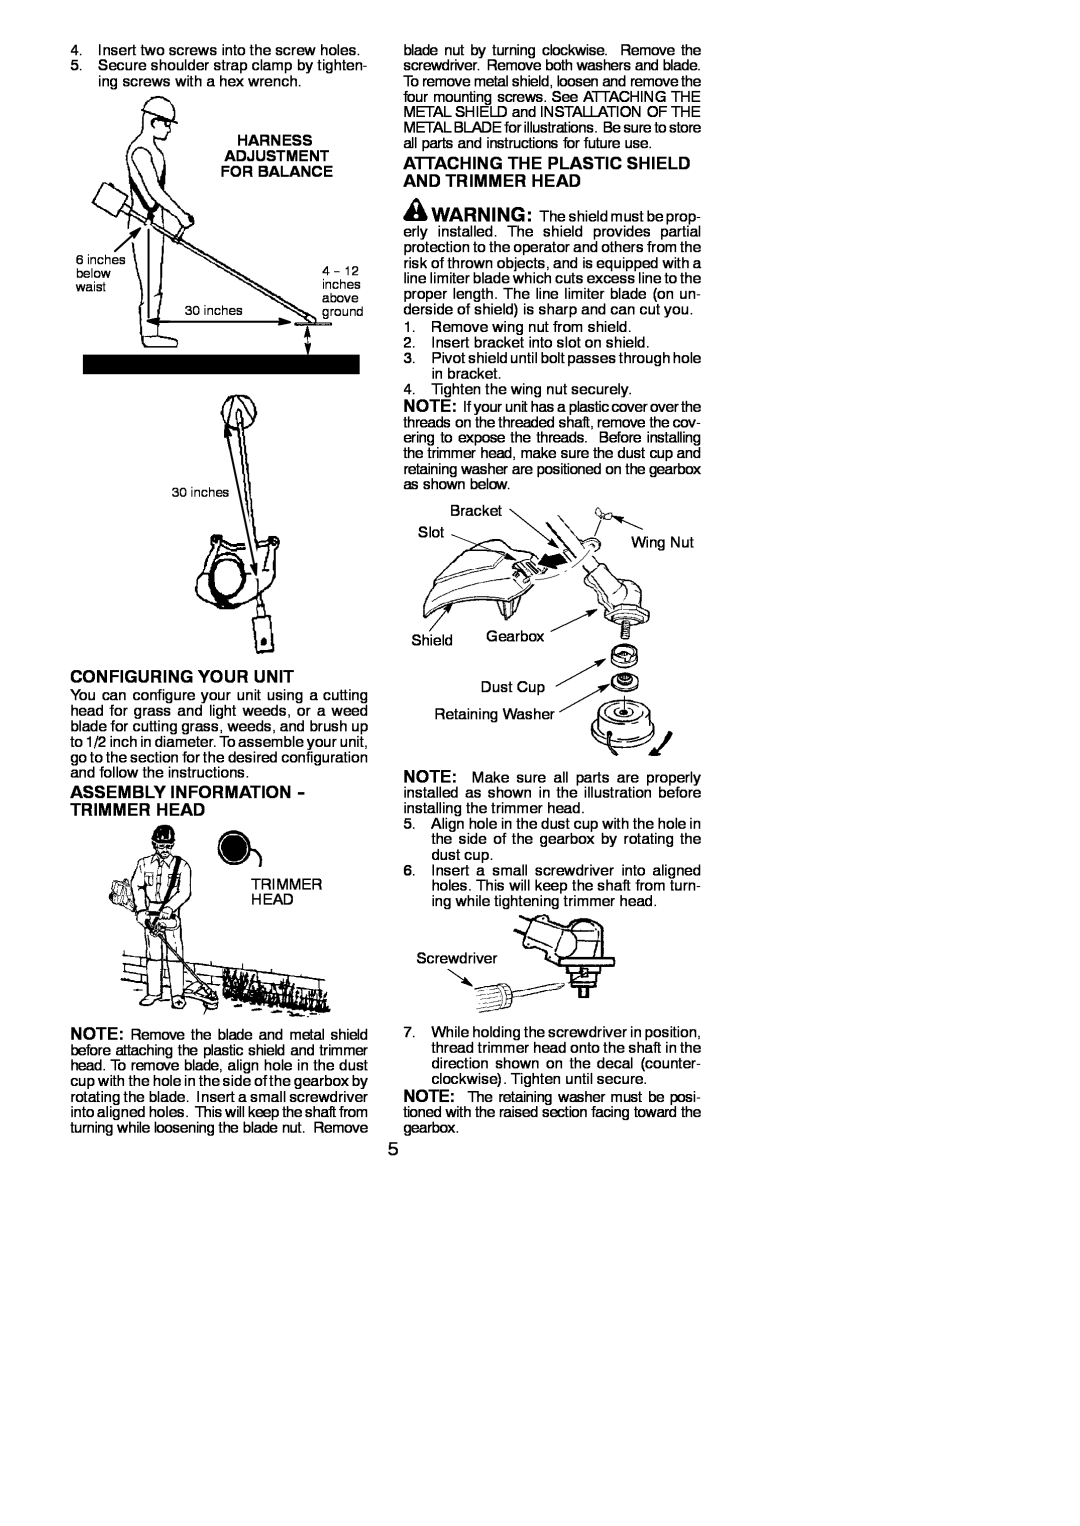 Weed Eater 530164314 Attaching The Plastic Shield And Trimmer Head, Configuring Your Unit, Harness Adjustment For Balance 